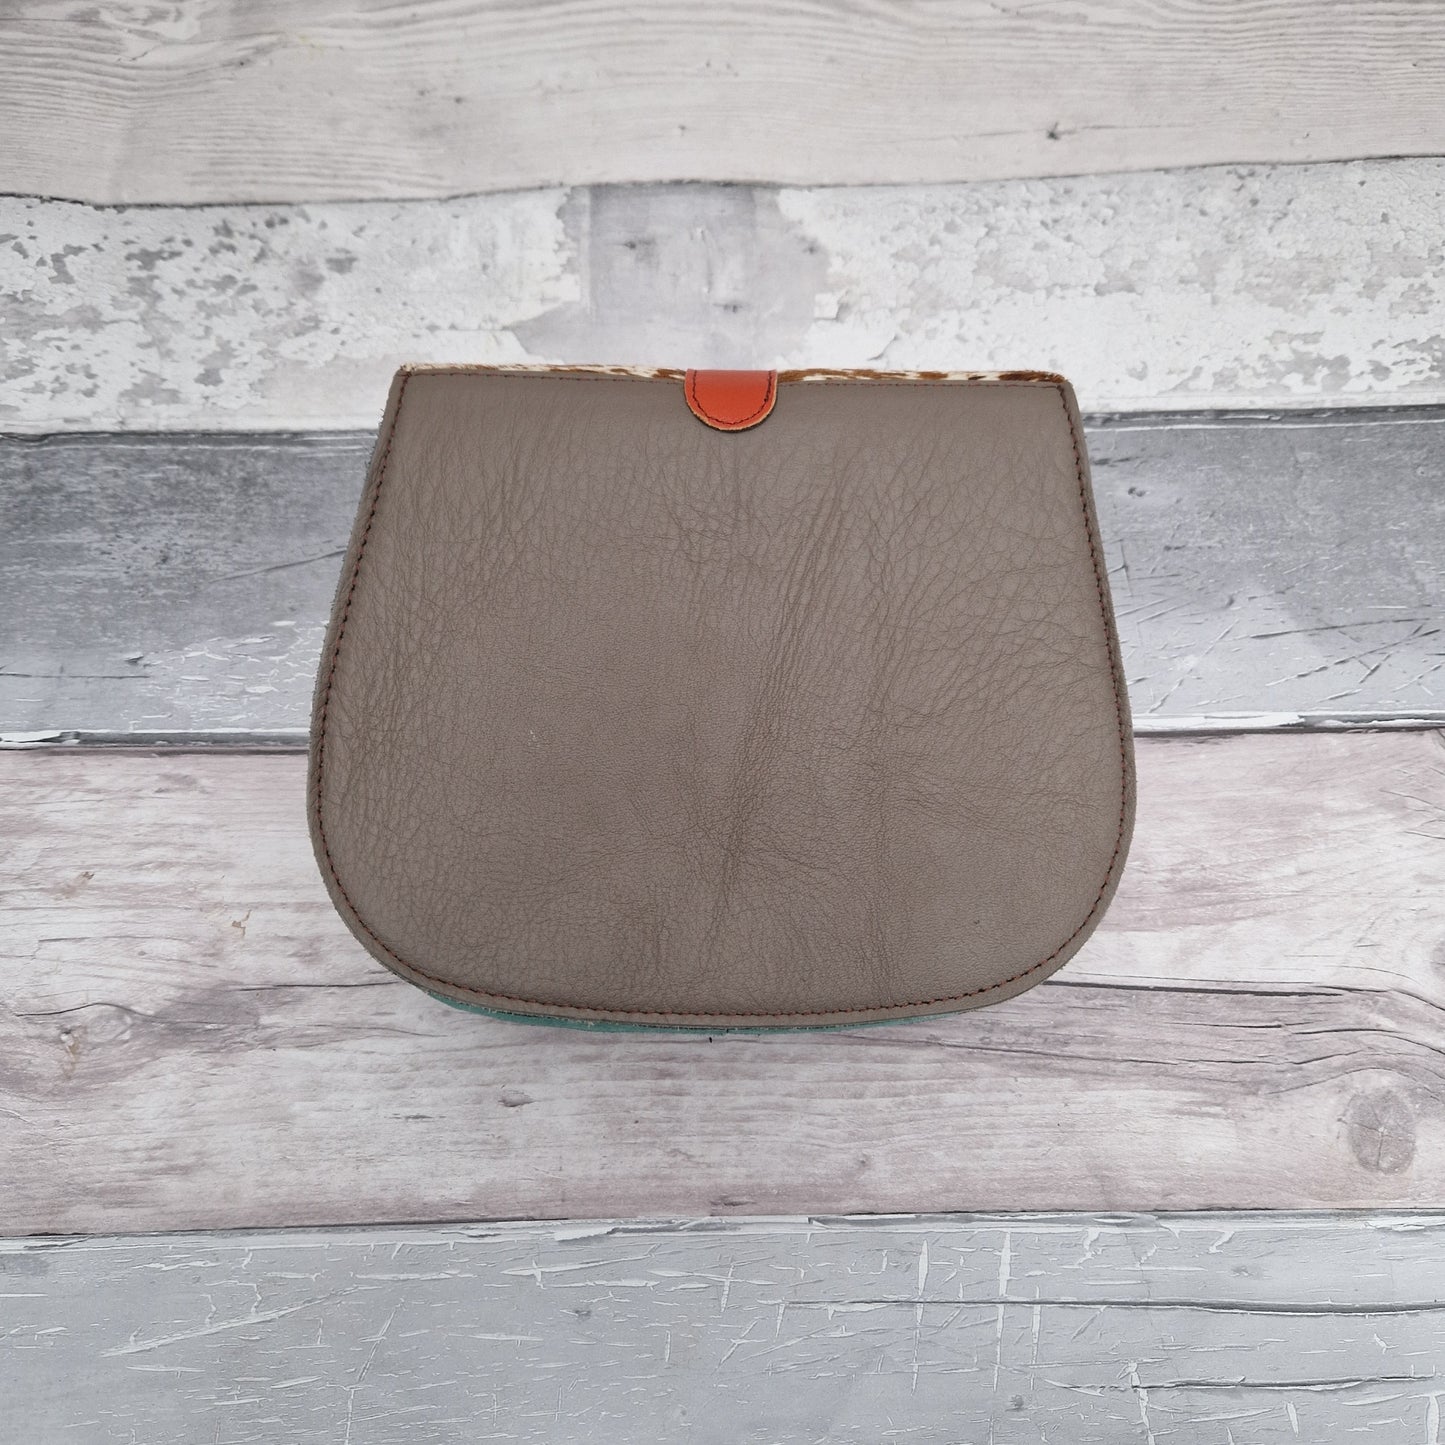 Bag made entirely from leather off cuts in a rainbow of colours with a textured panel in cow print.